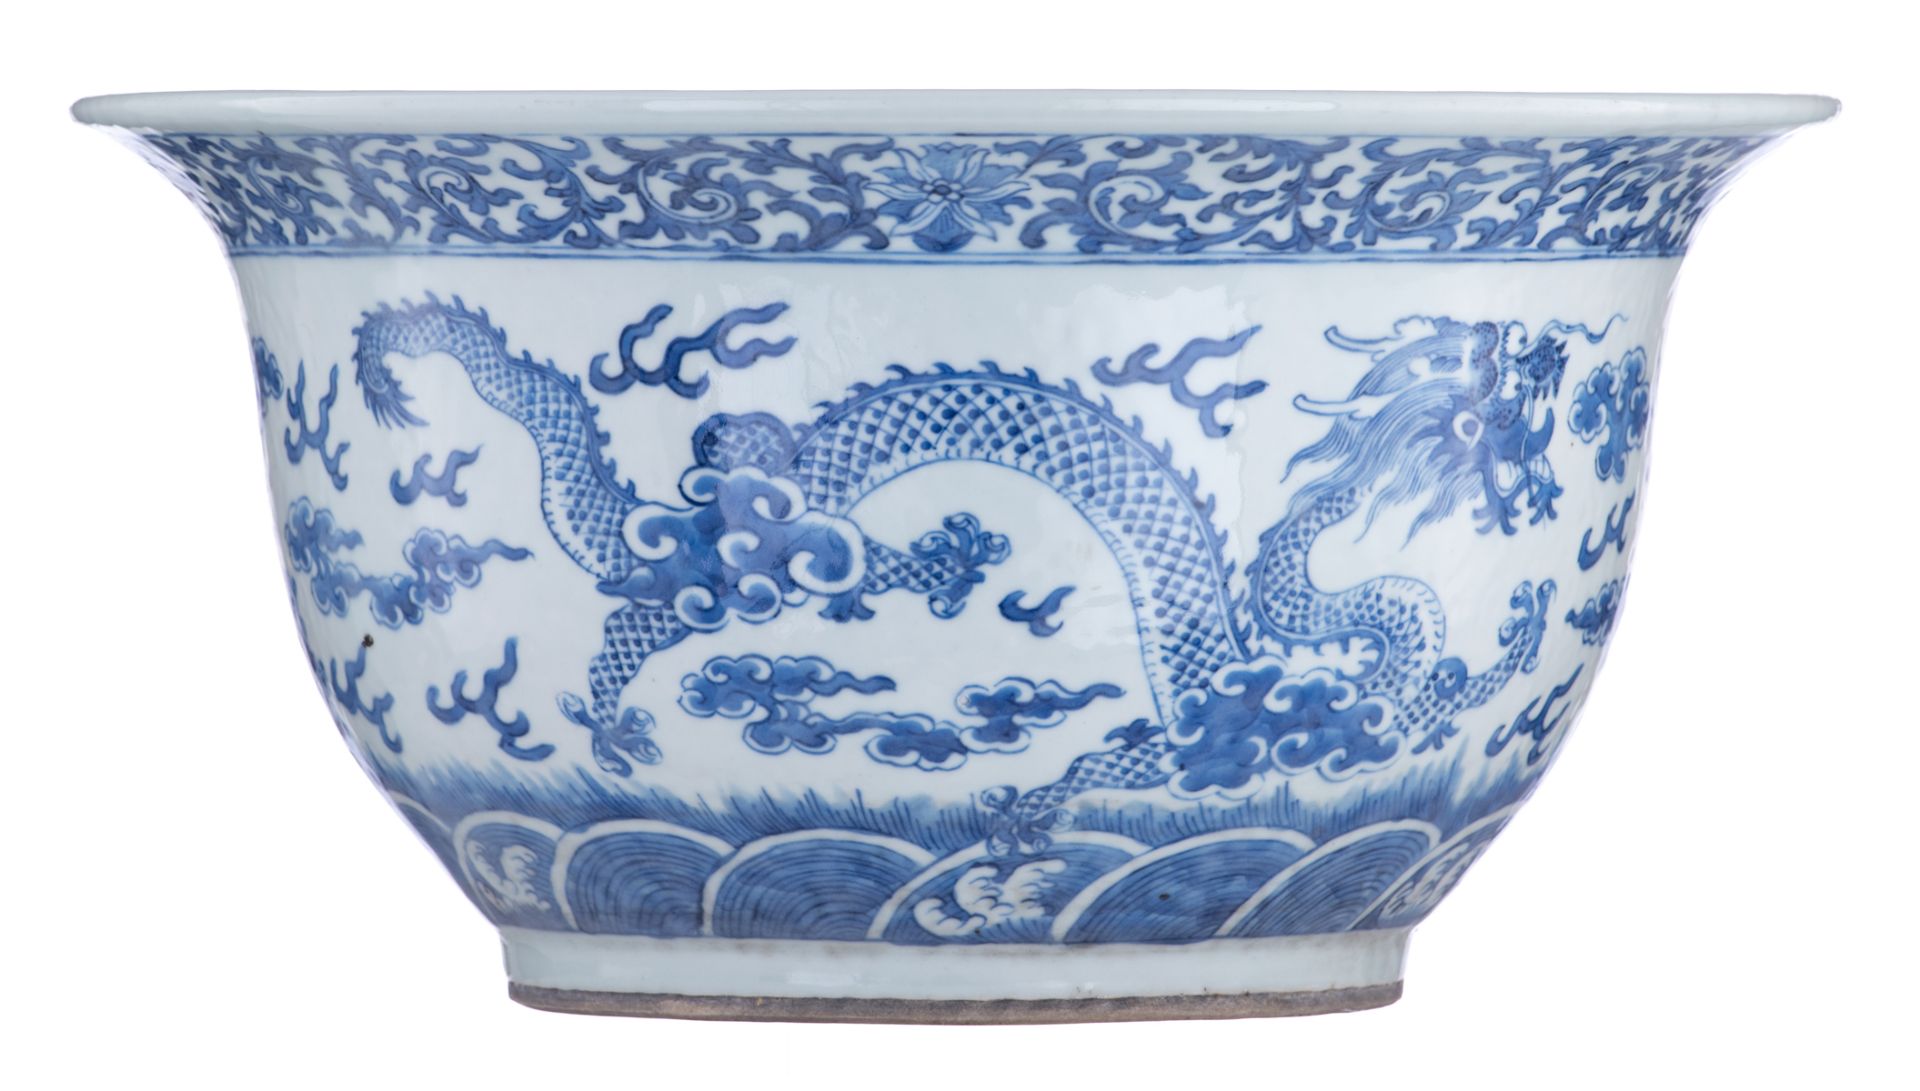 A Chinese blue and white jardinière, decorated with a pair of dragons chasing a flaming pearl amidst - Image 5 of 7